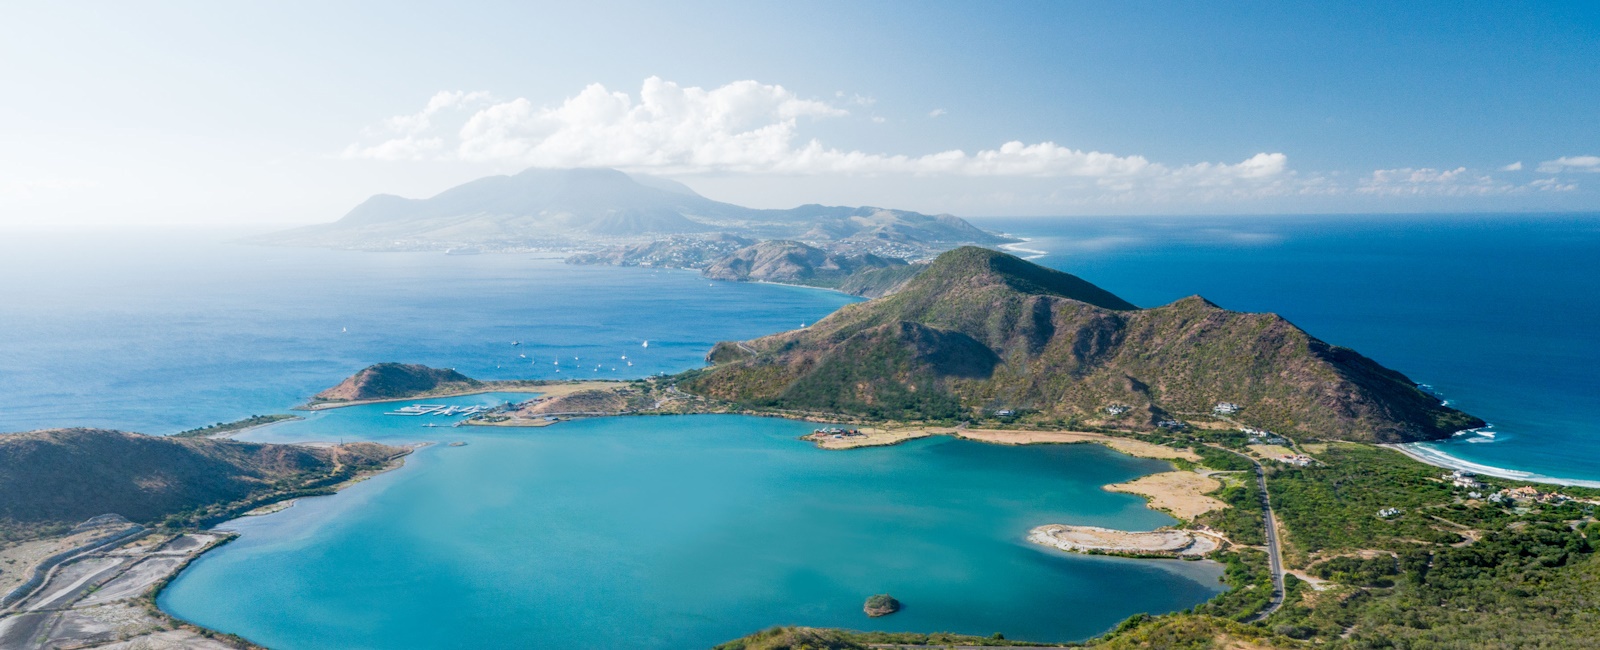 St Kitts and Nevis, Christophe Harbour & South East Peninsula